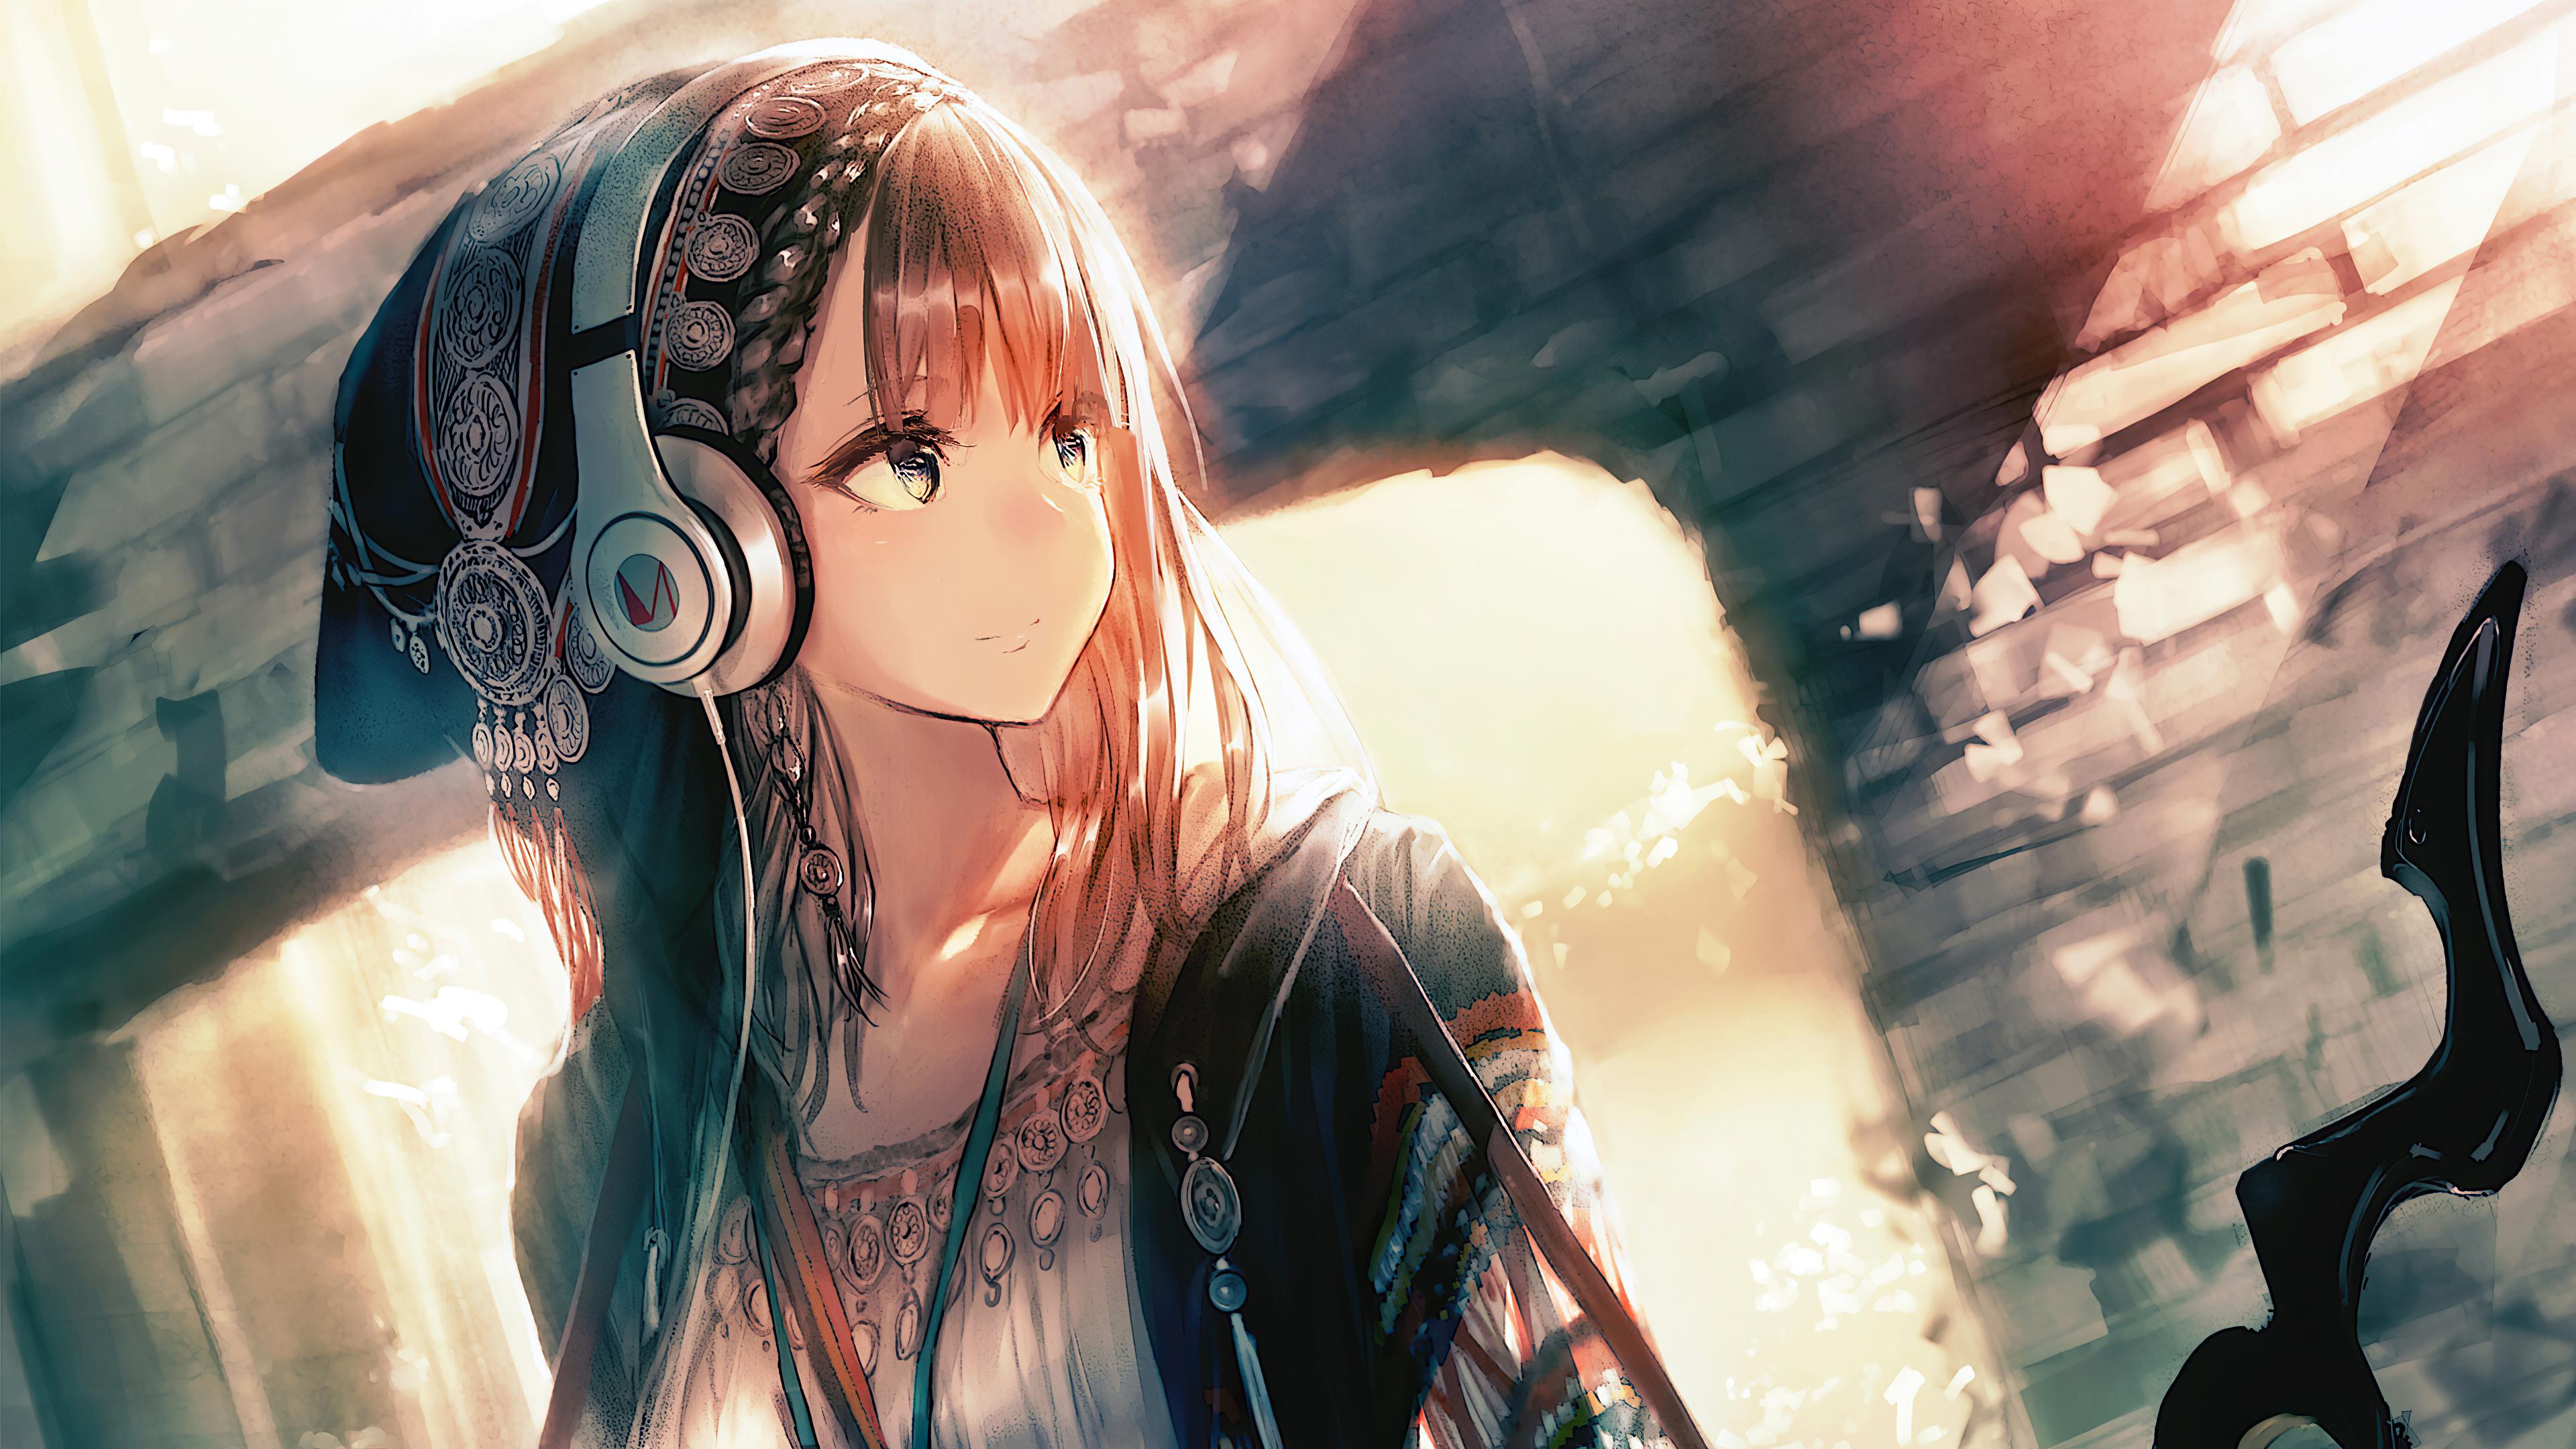 HD wallpaper Beautiful young woman in headphones listening to music adult   Wallpaper Flare